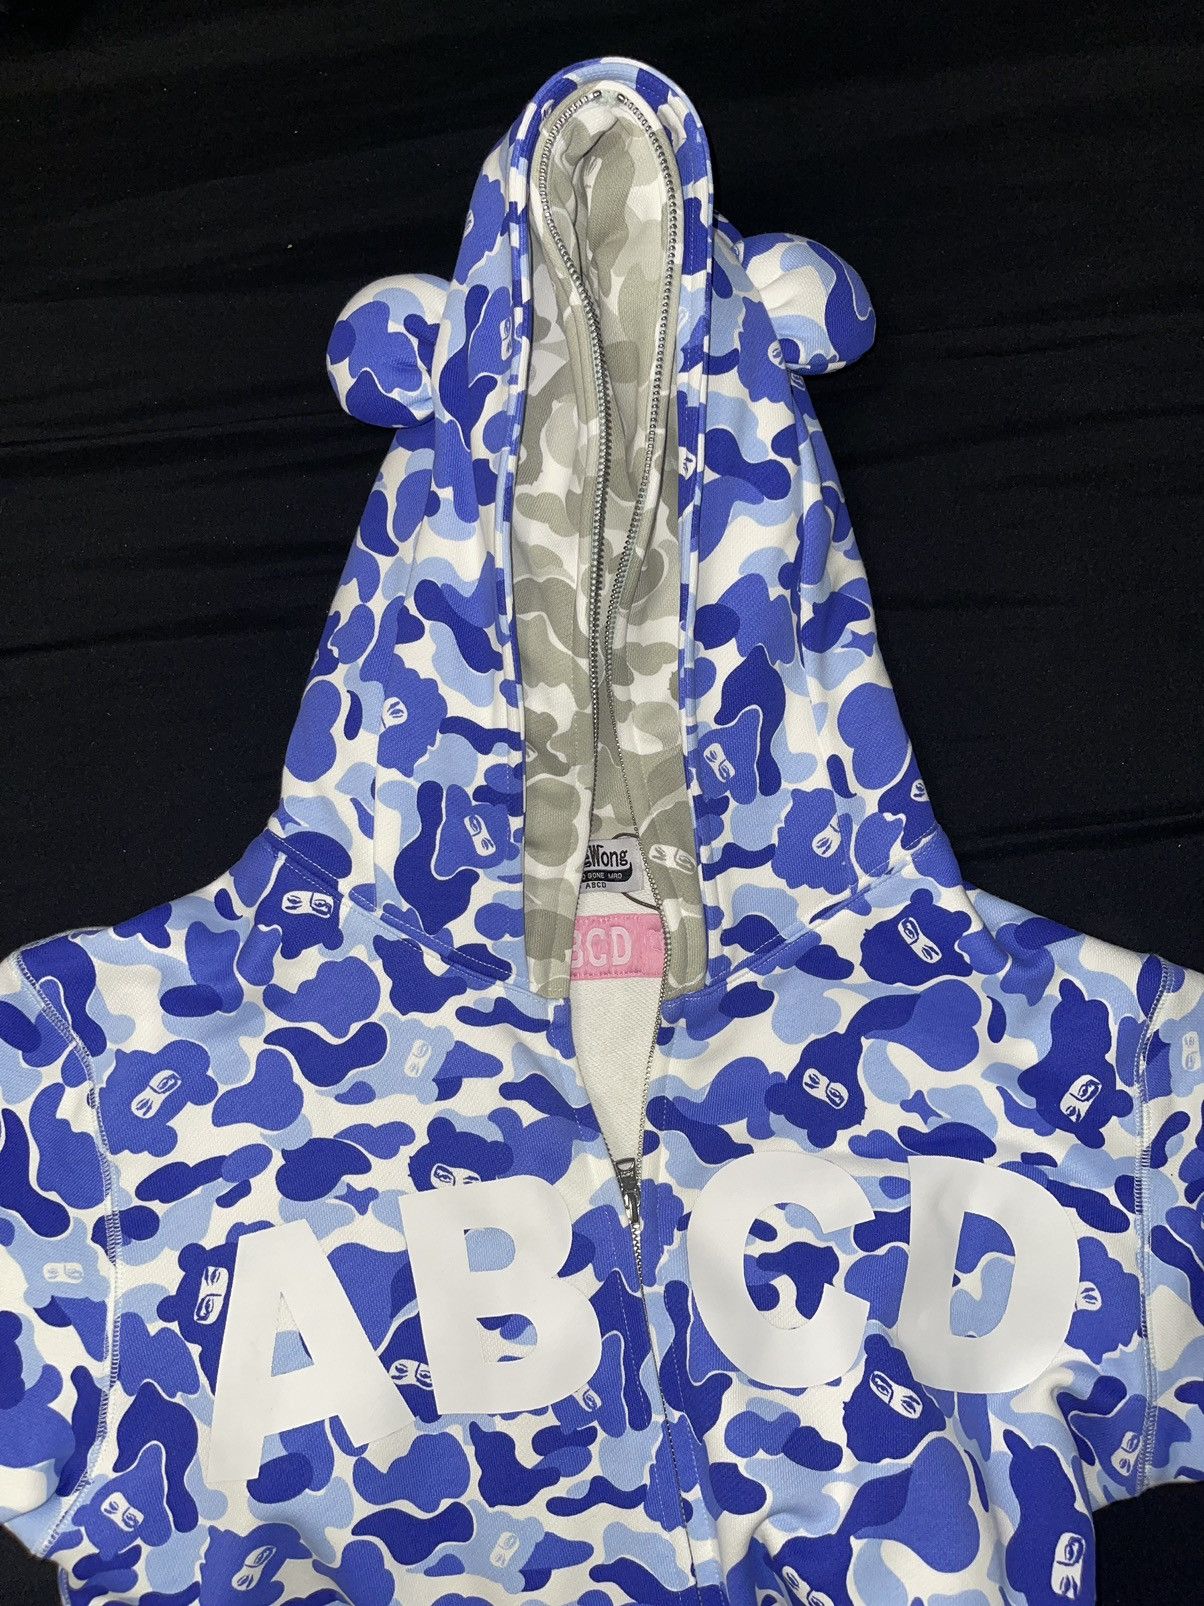 Japanese Brand Jose Wong ABCD double hoodie | Grailed